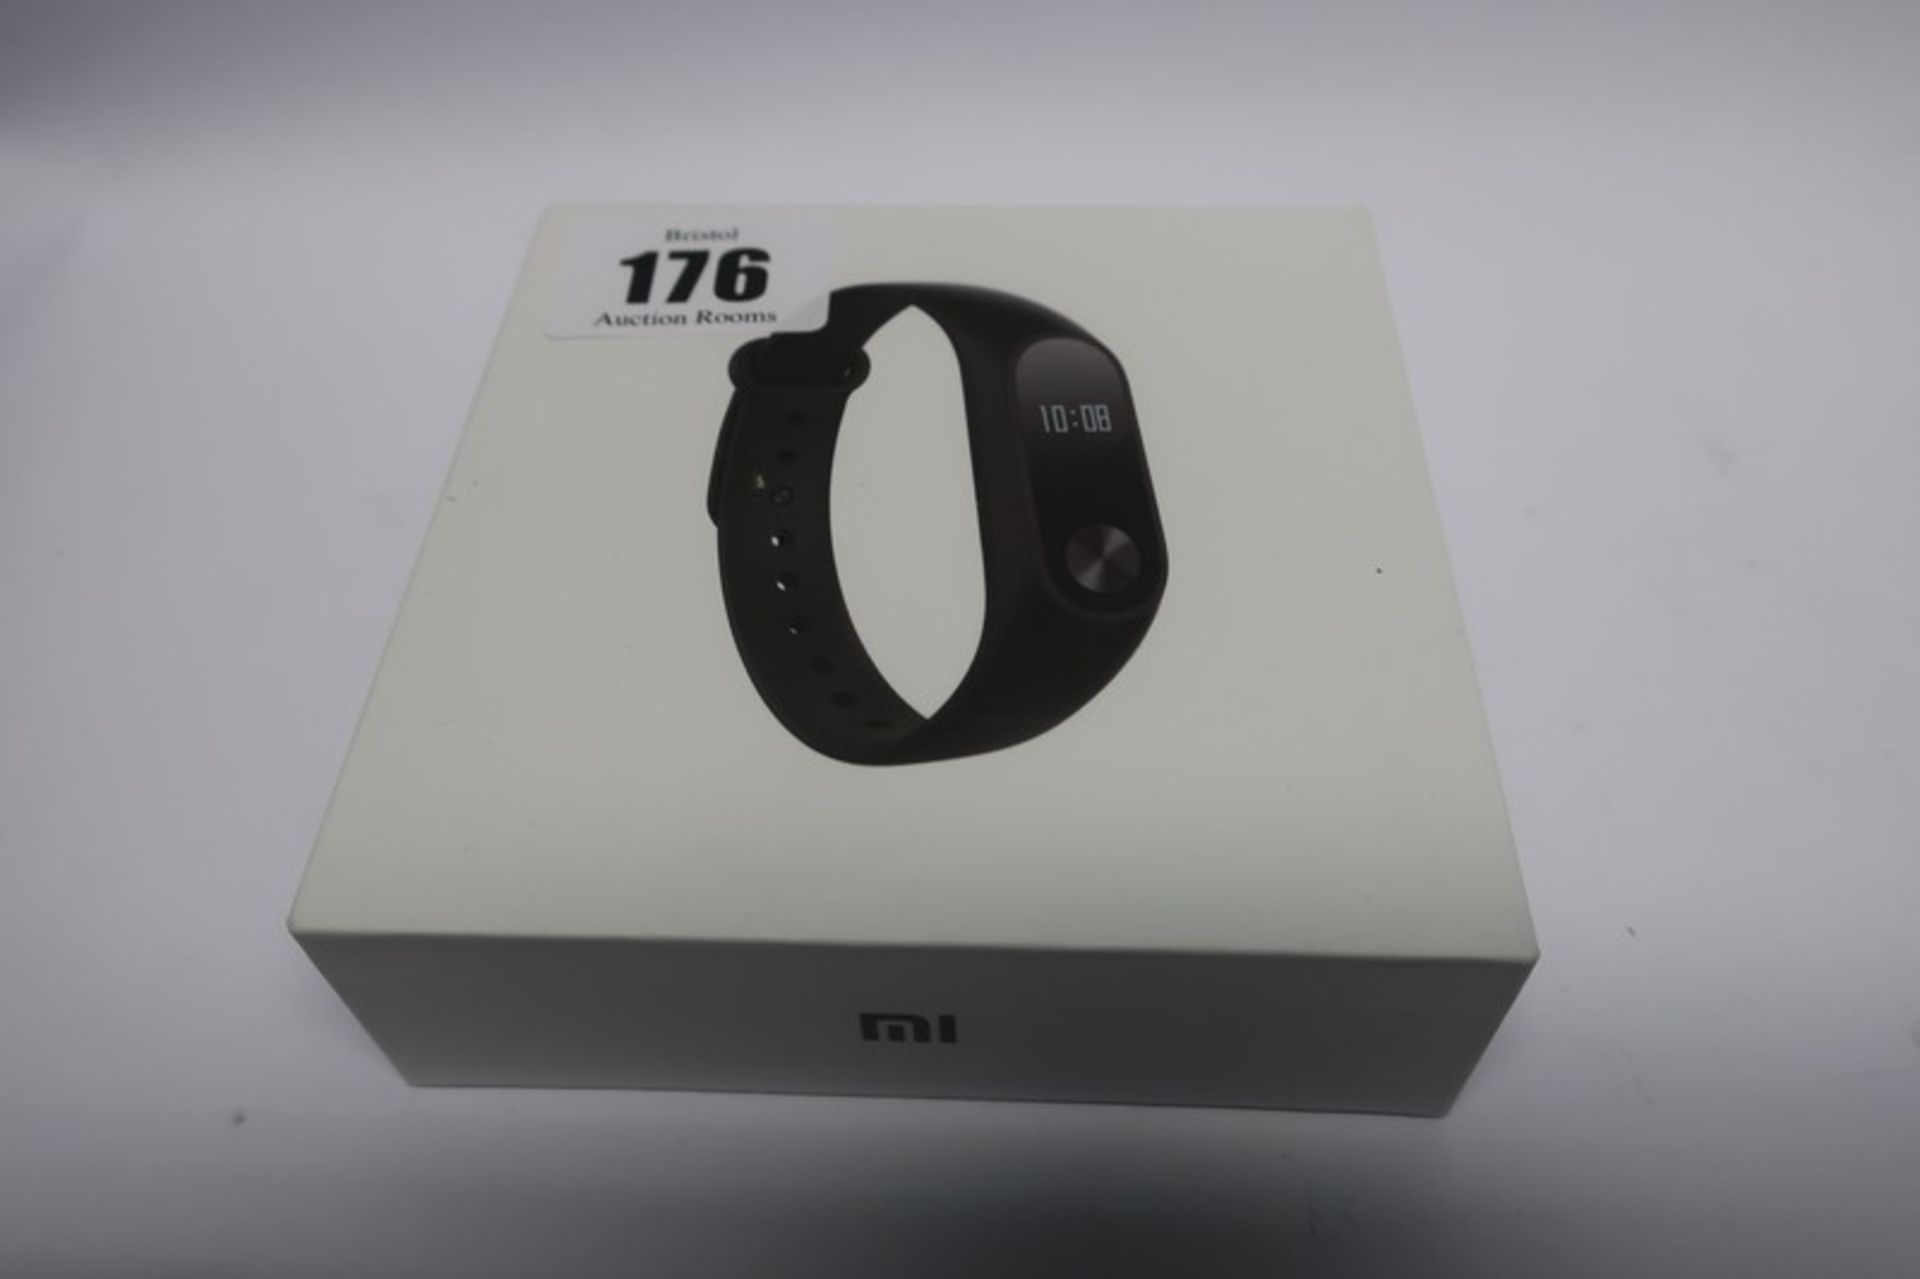 Six boxed as new Xiaomi Mi Band Fitness Trackers with Bluetooth, smartwatch and heart rate monitor